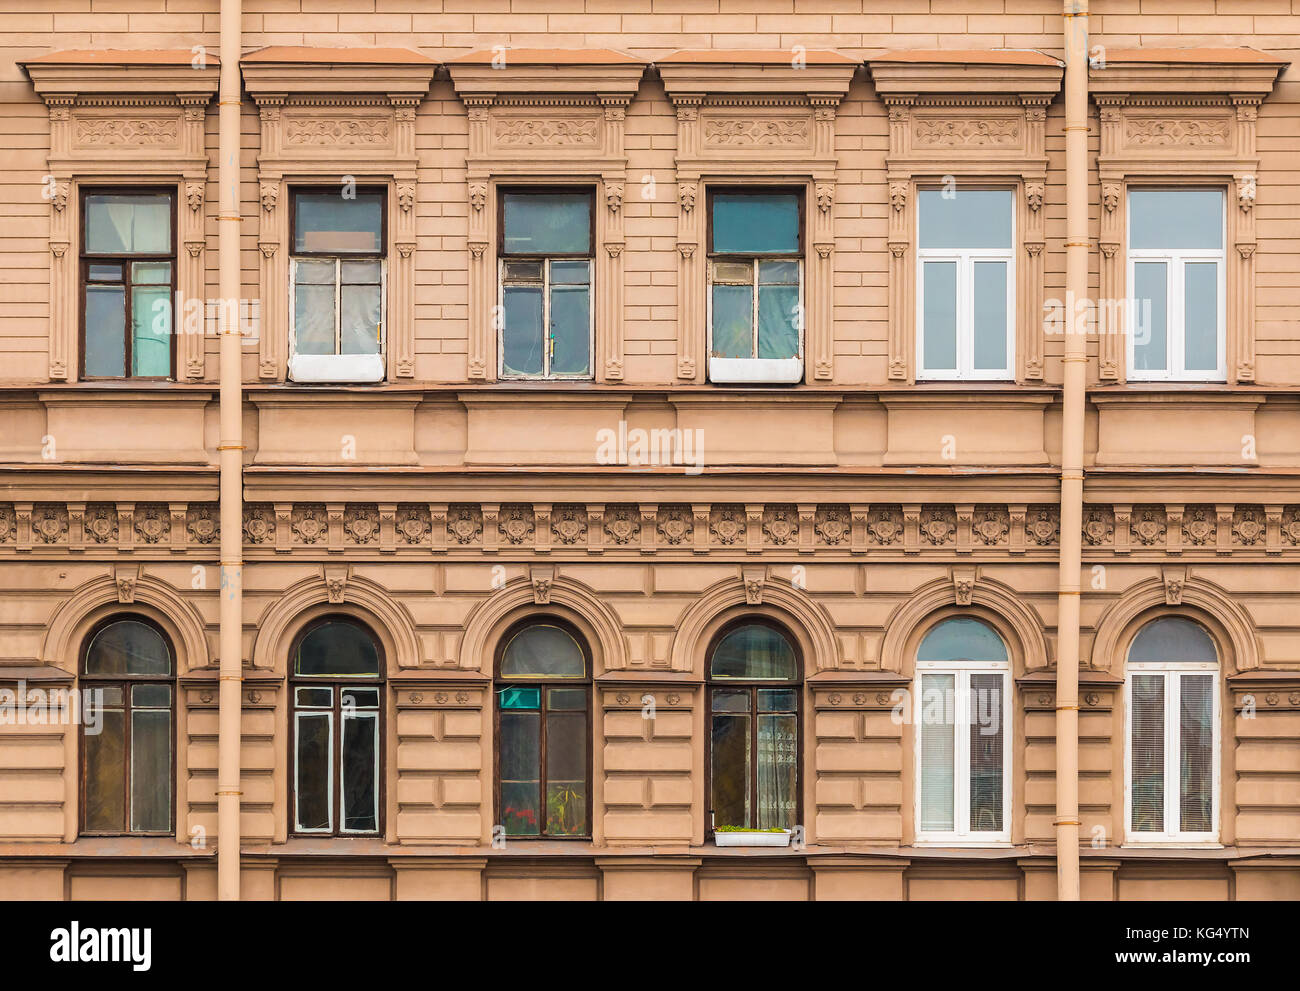 Several windows in a row on facade of urban apartment building front view, St. Petersburg, Russia Stock Photo